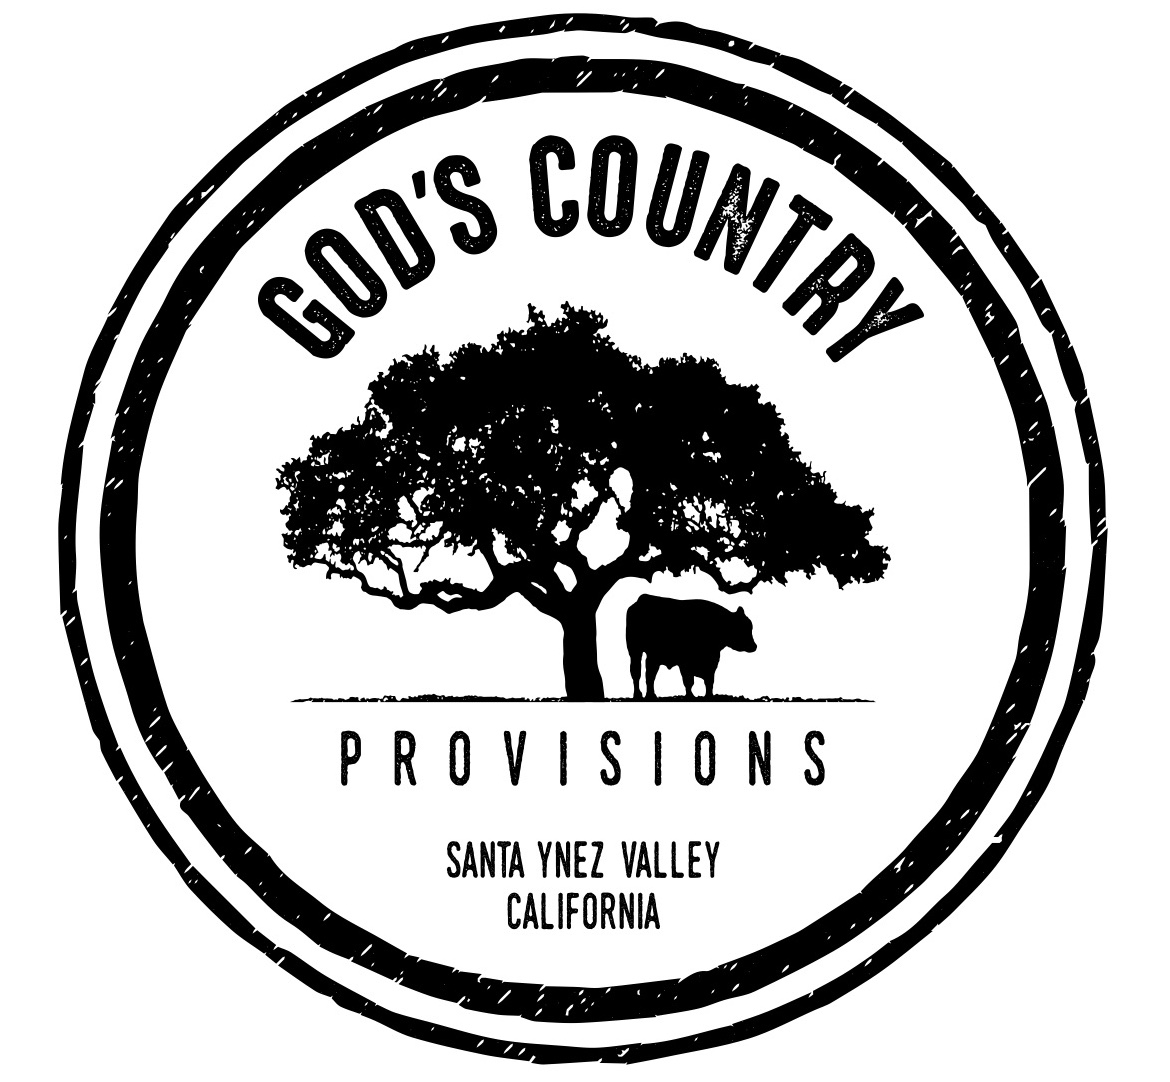 God's Country Provisions